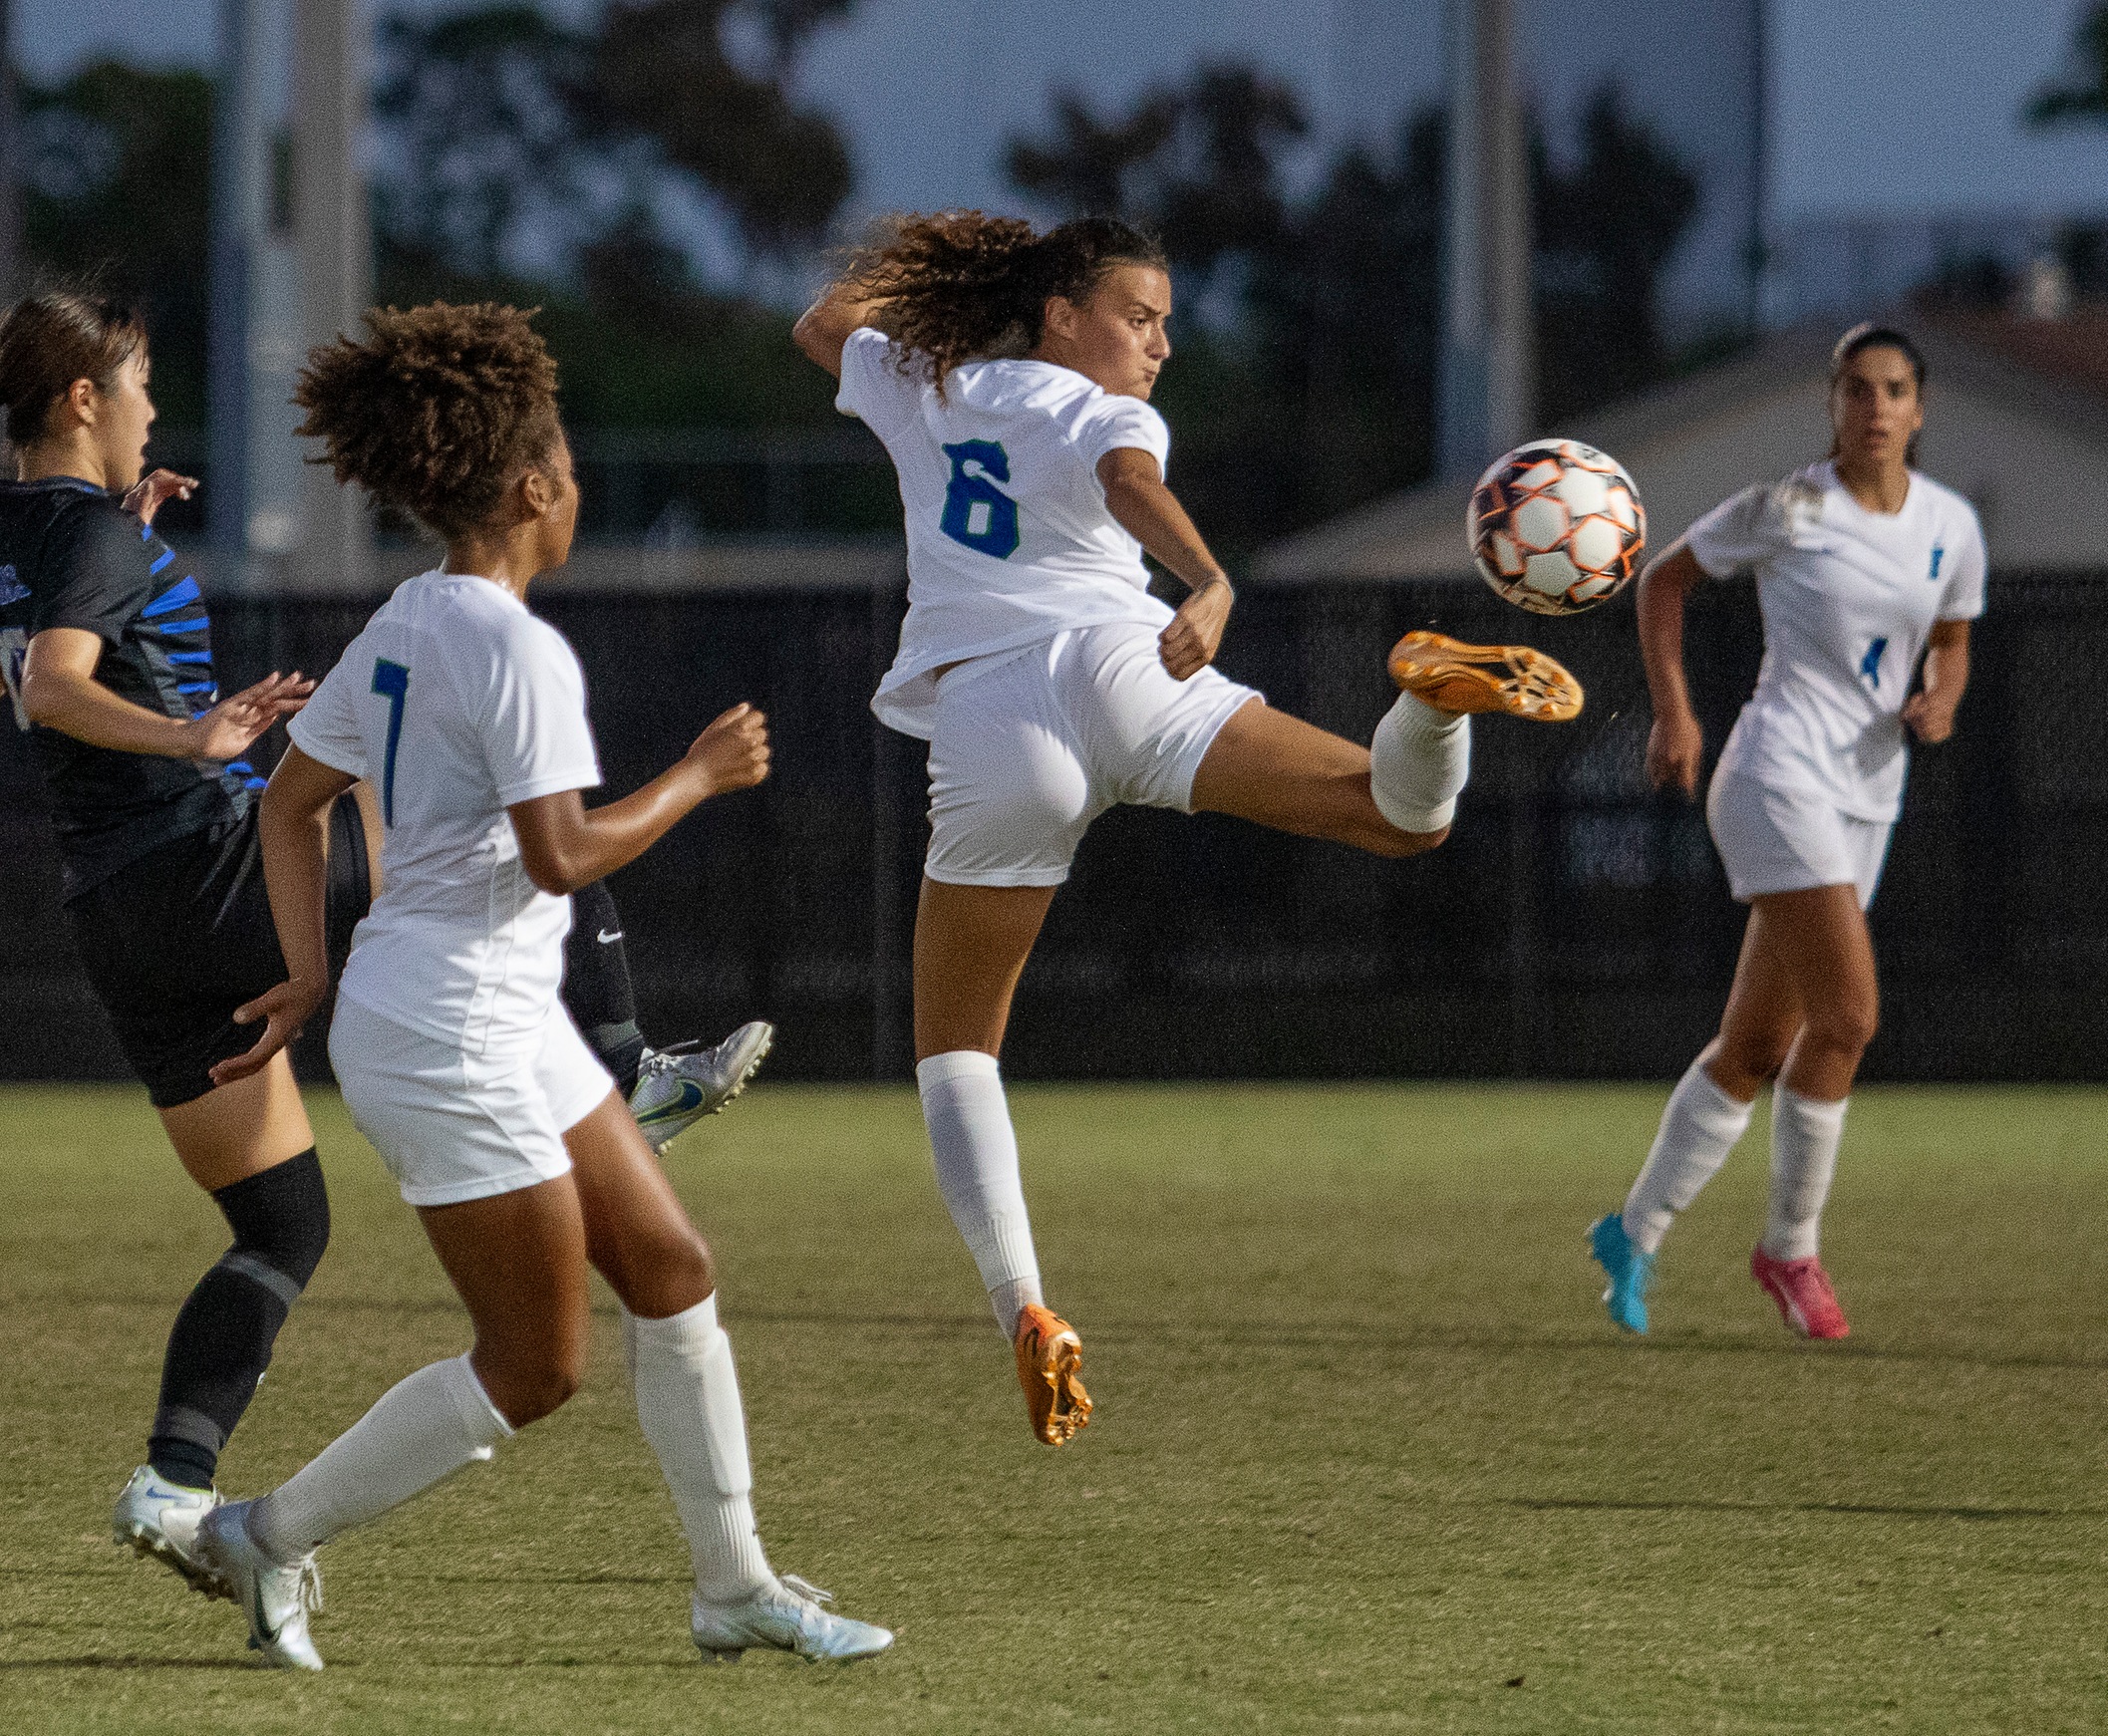 Women's soccer team to play in Southeast District Tournament this weekend